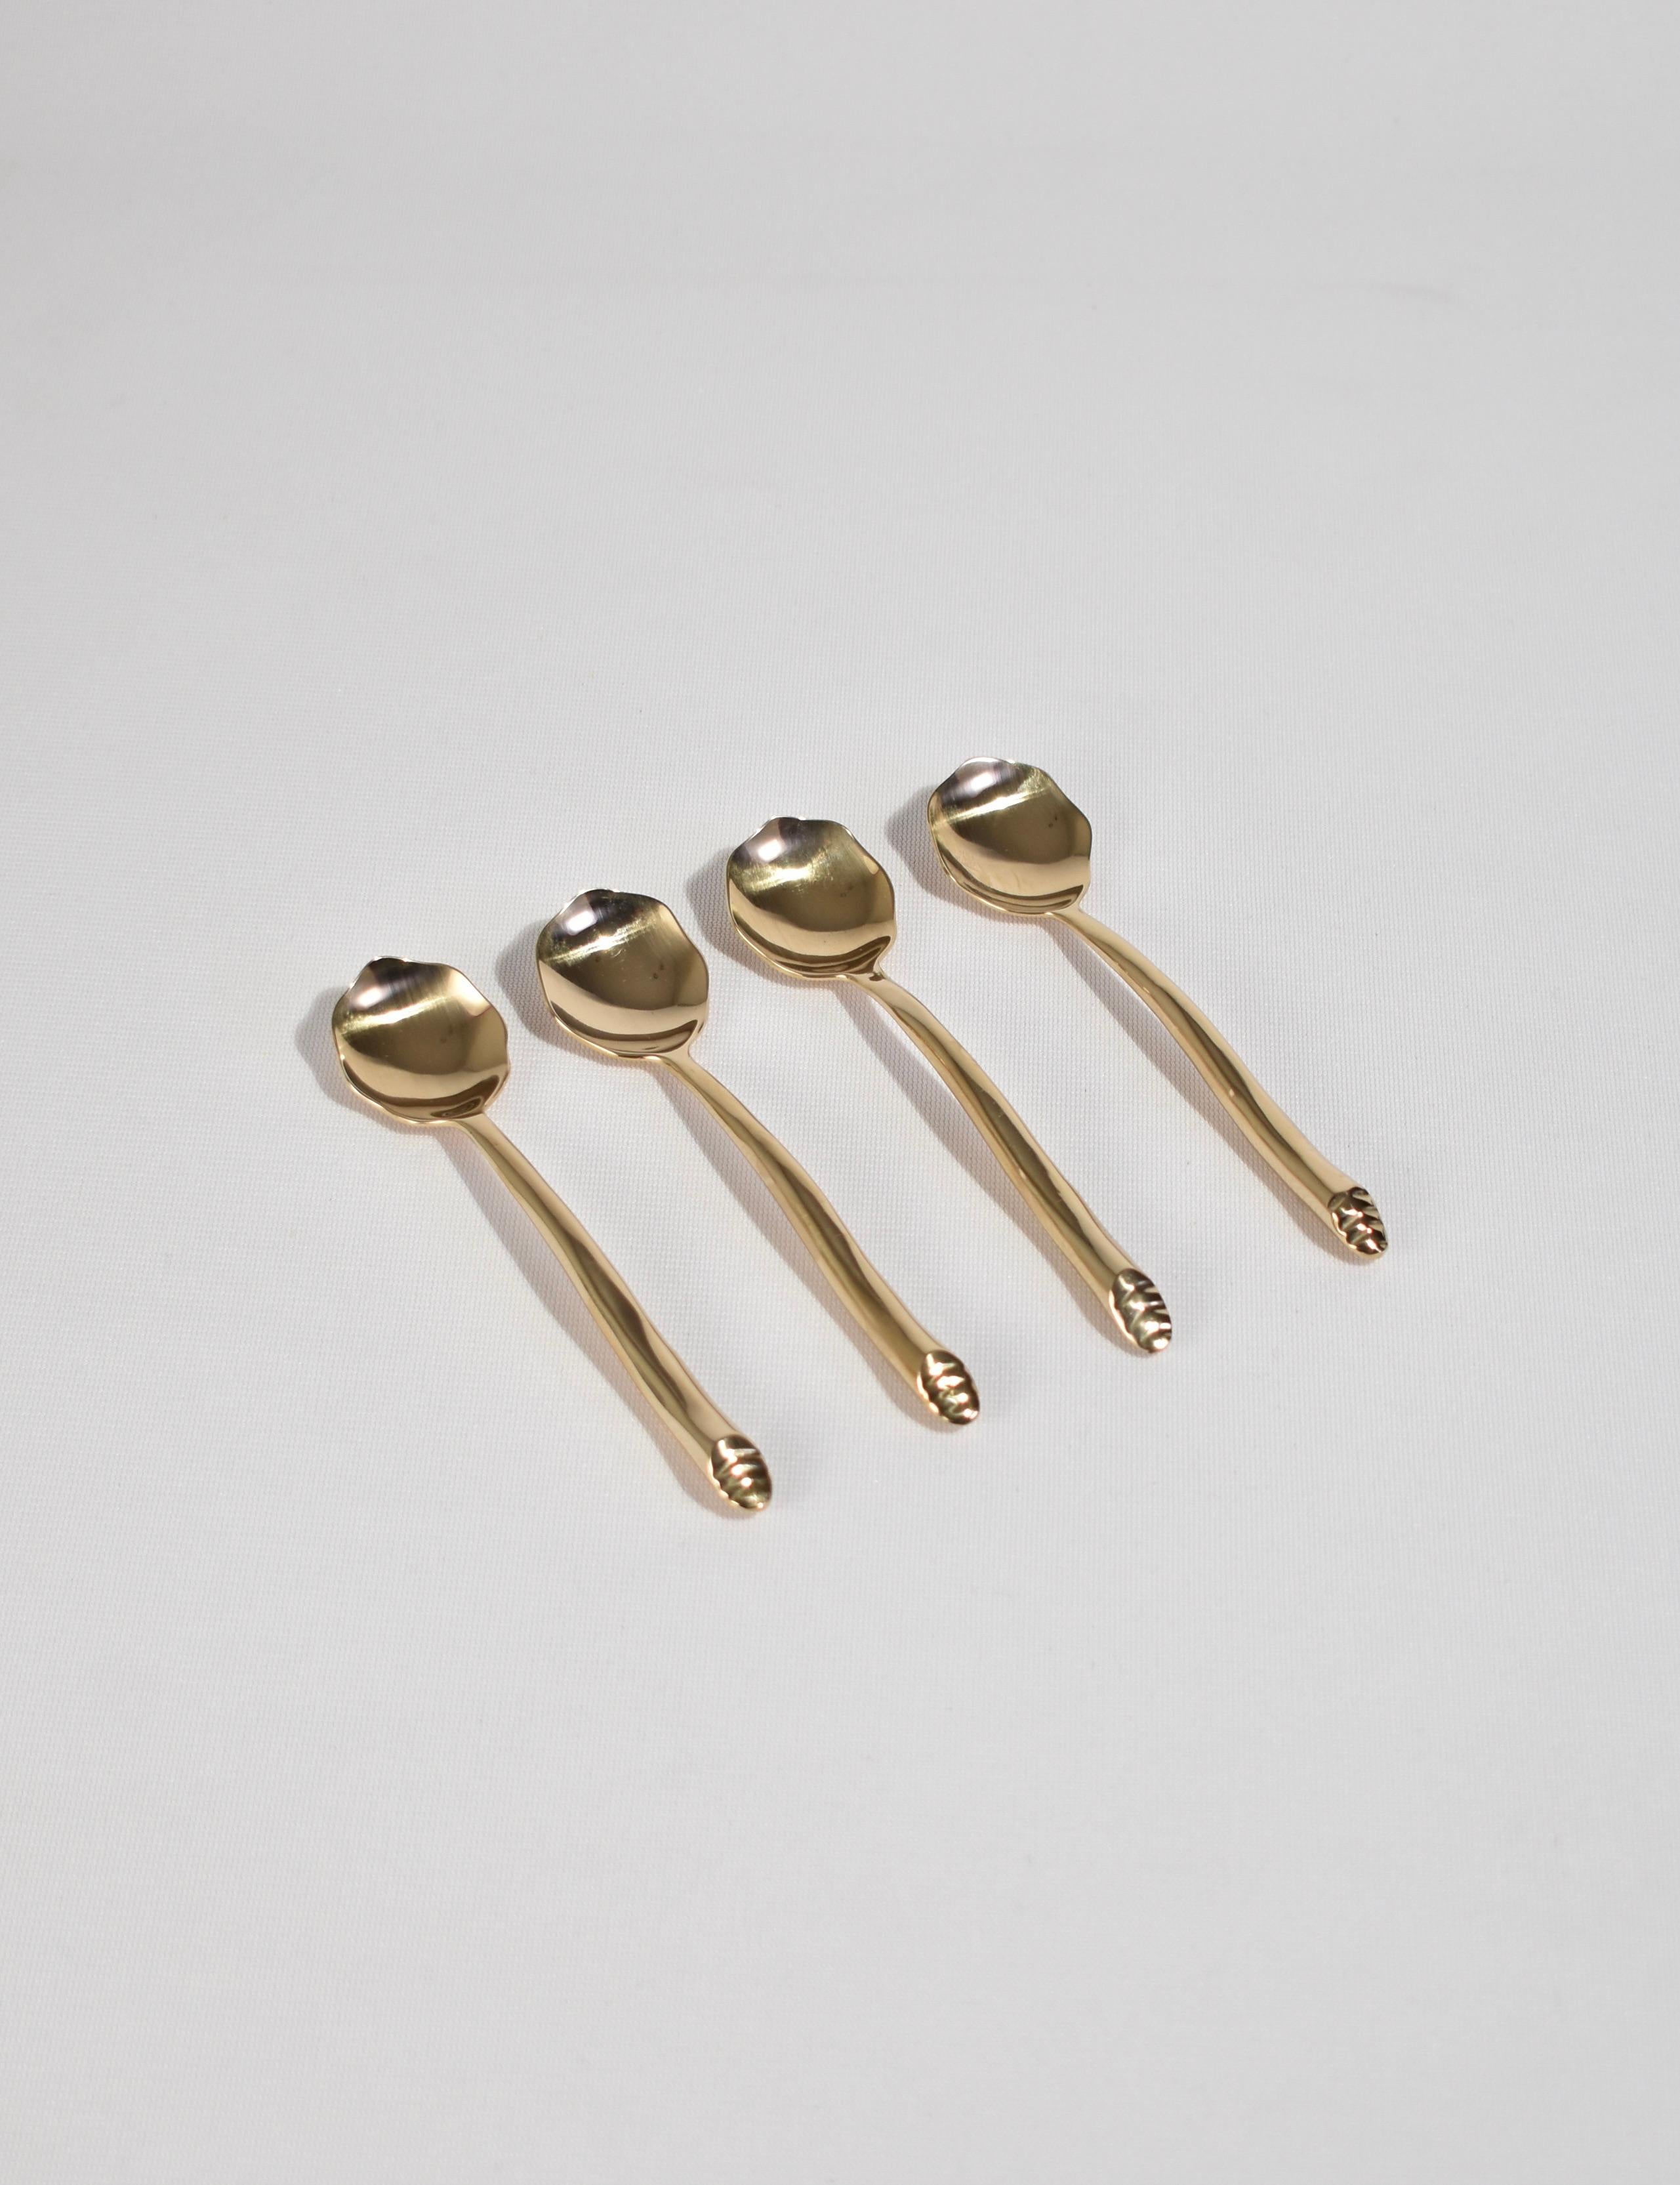 Beautiful, 4 piece bronze demitasse spoon set in 'Shore' pattern. Each piece is hand-forged and features an undulating handle with angled end. Impressed above end 'IZABEL LAM'. 

Designed in the late 1980s by Izabel Lam, available exclusively on